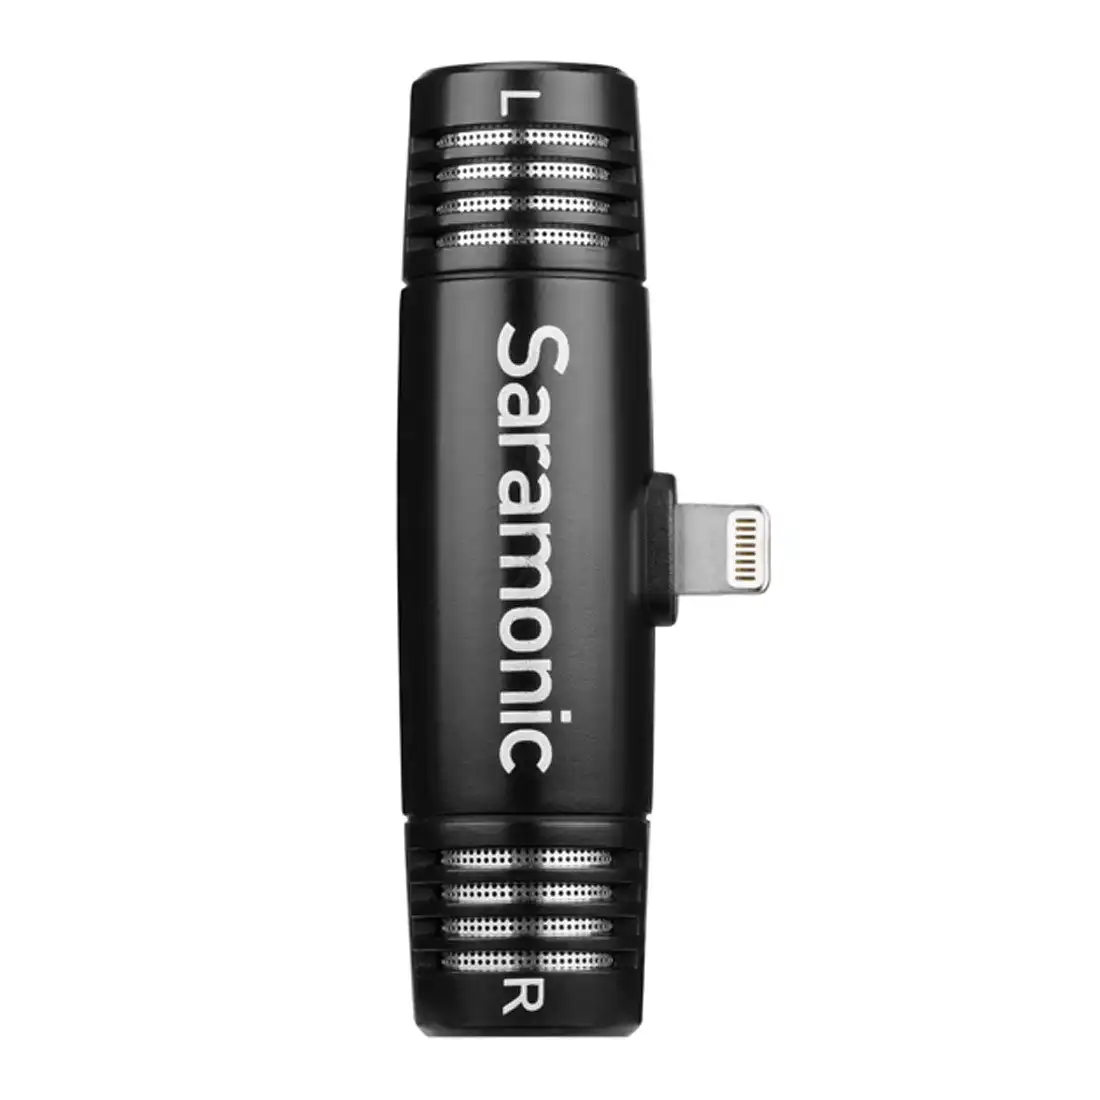 Saramonic SPMIC510DI Compact Stereo Microphone for iOS Devices with Lightning Connector